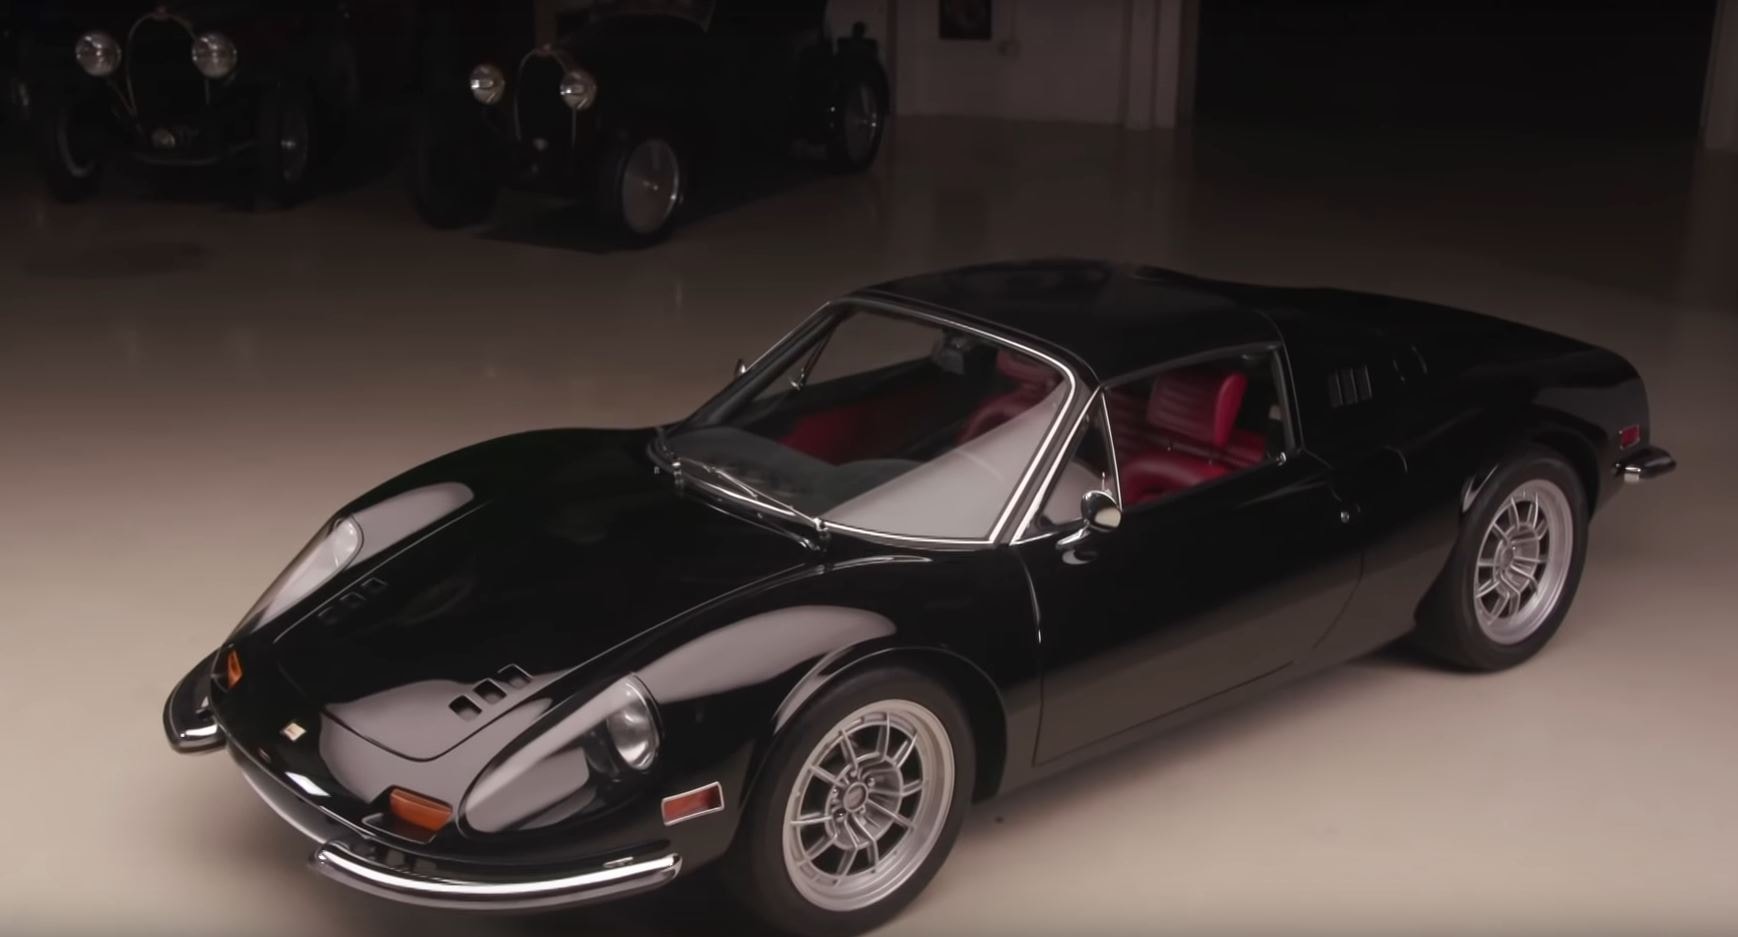 Famous Ferrari collector restomods a Dino, plans to build more for sale